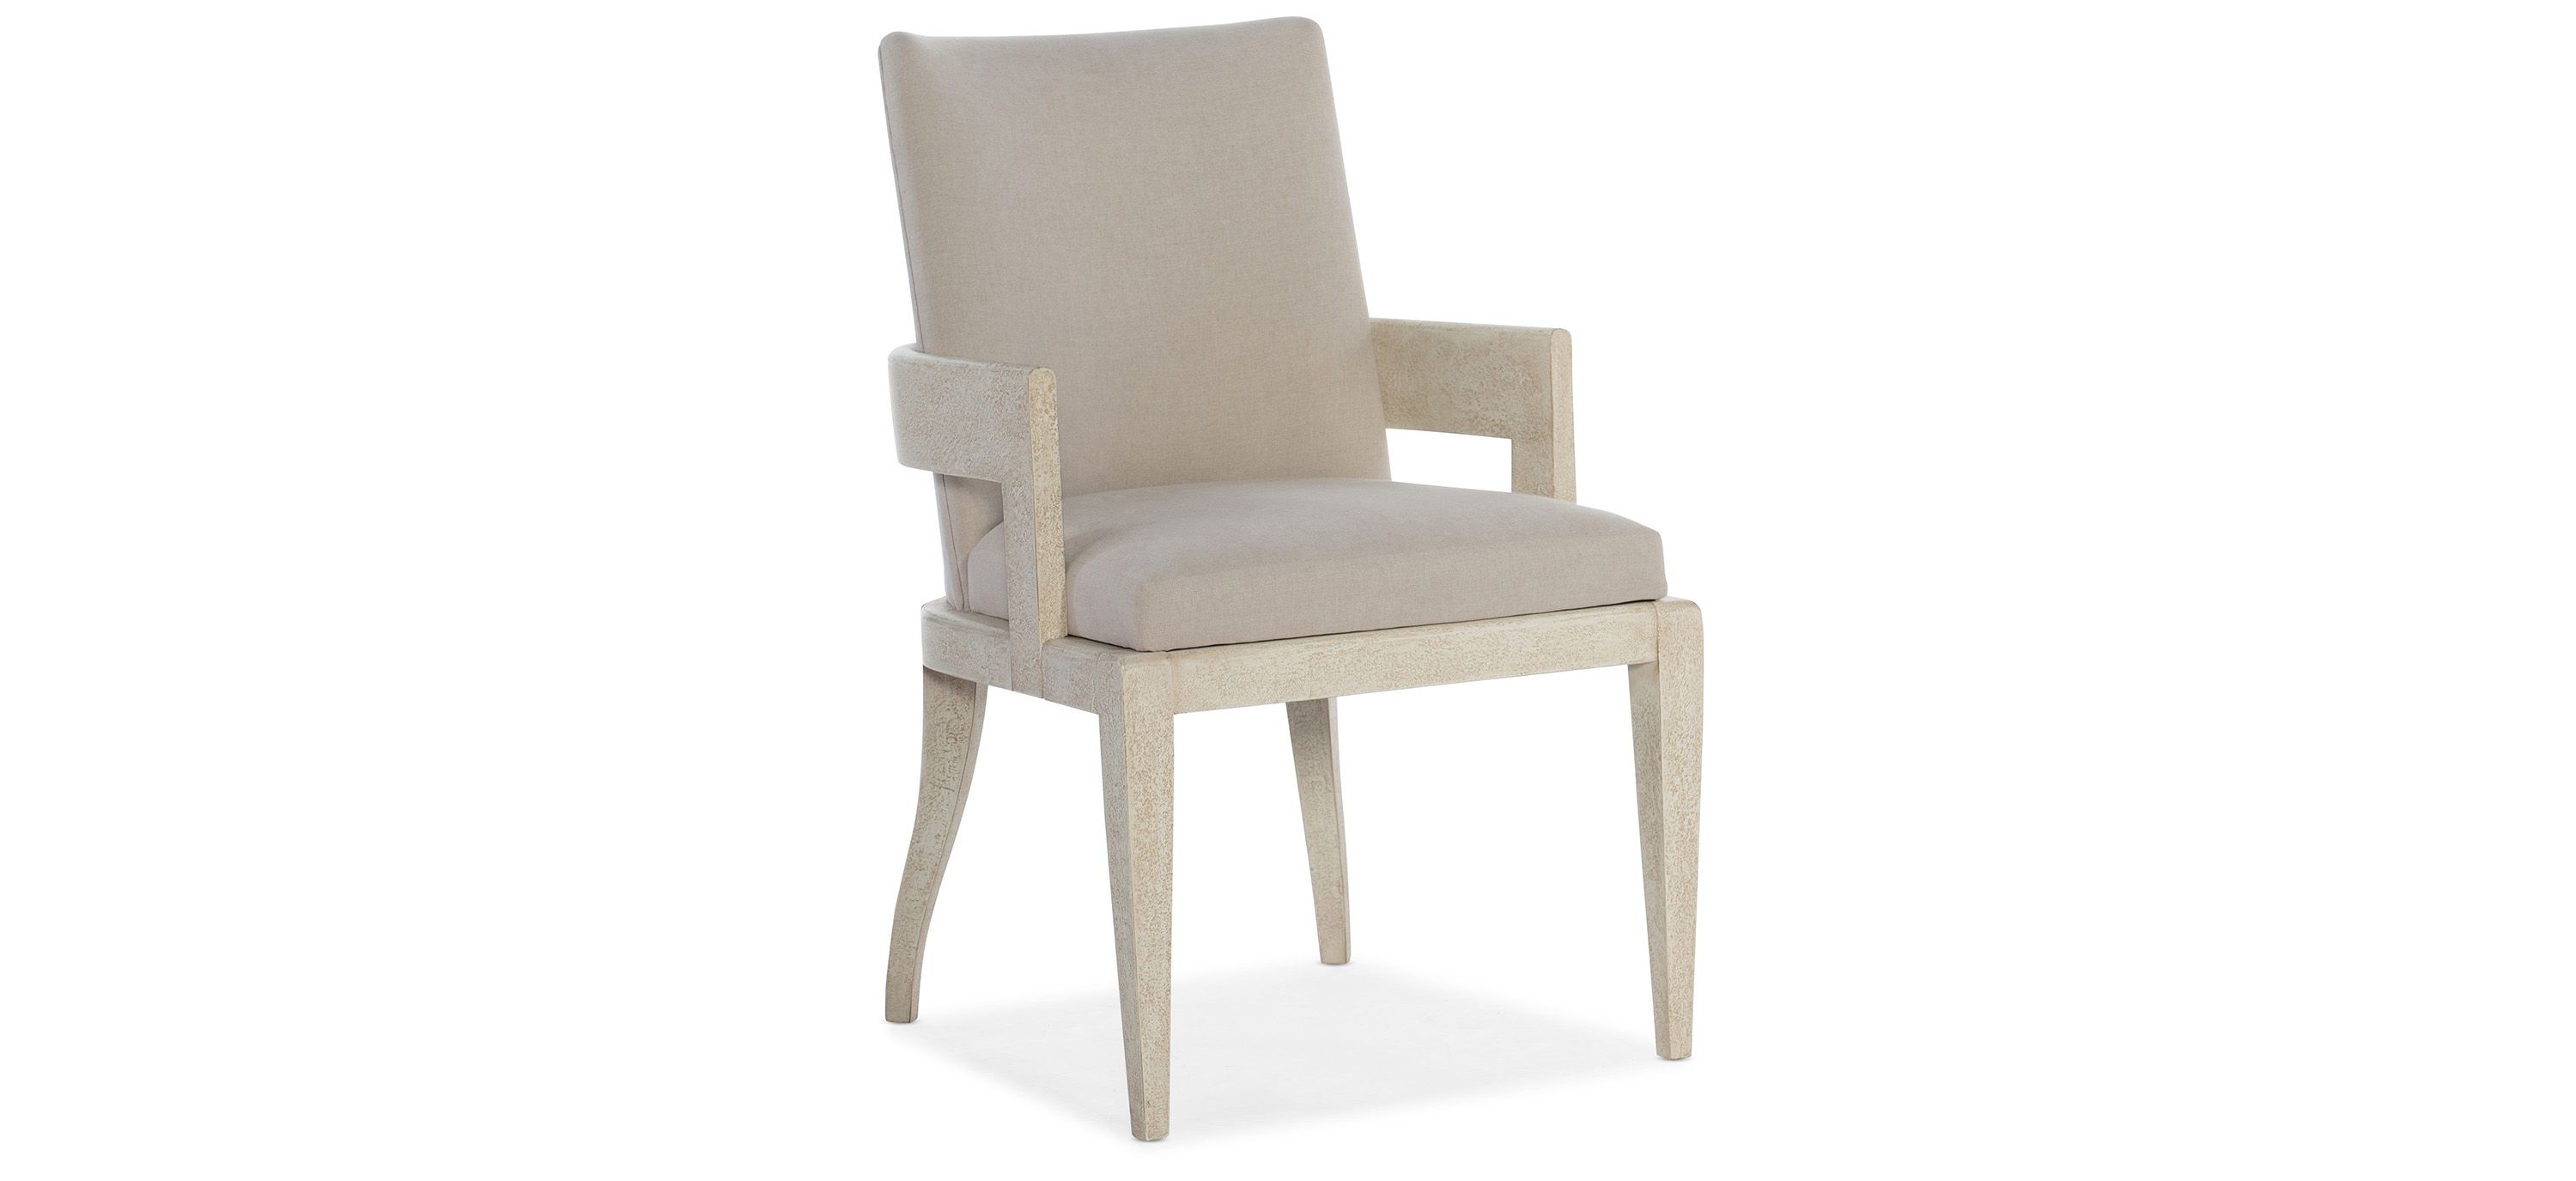 Cascade Upholstered Arm Chair - Set of 2